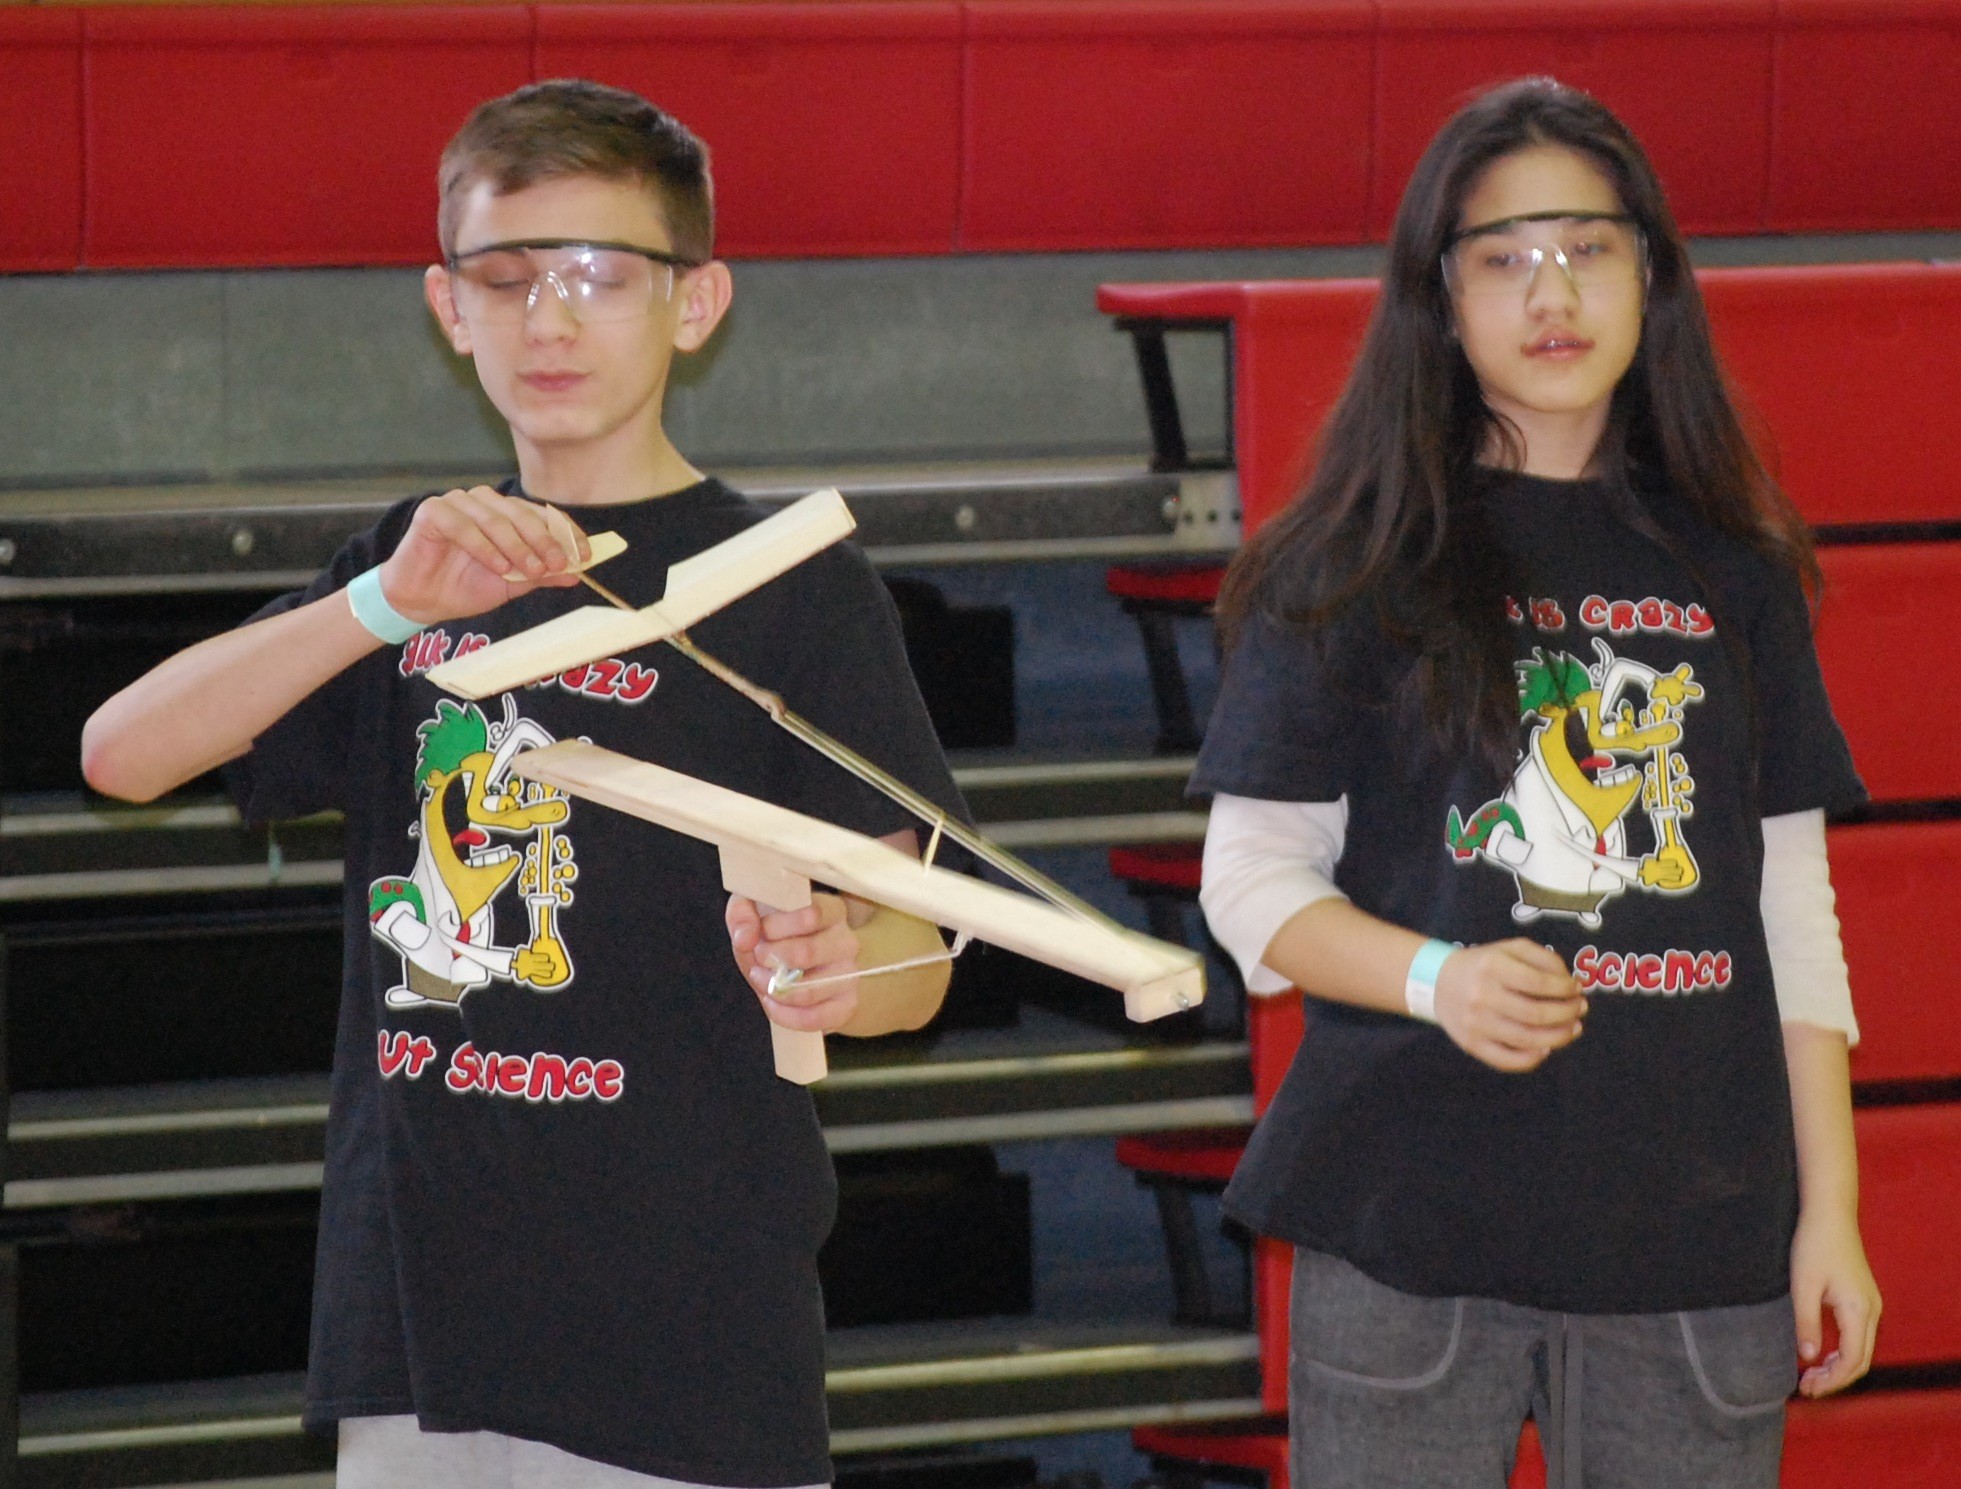 Salk students Evan Peters and Jillian Smith, both of Wantagh, were ready to fly their airplane.